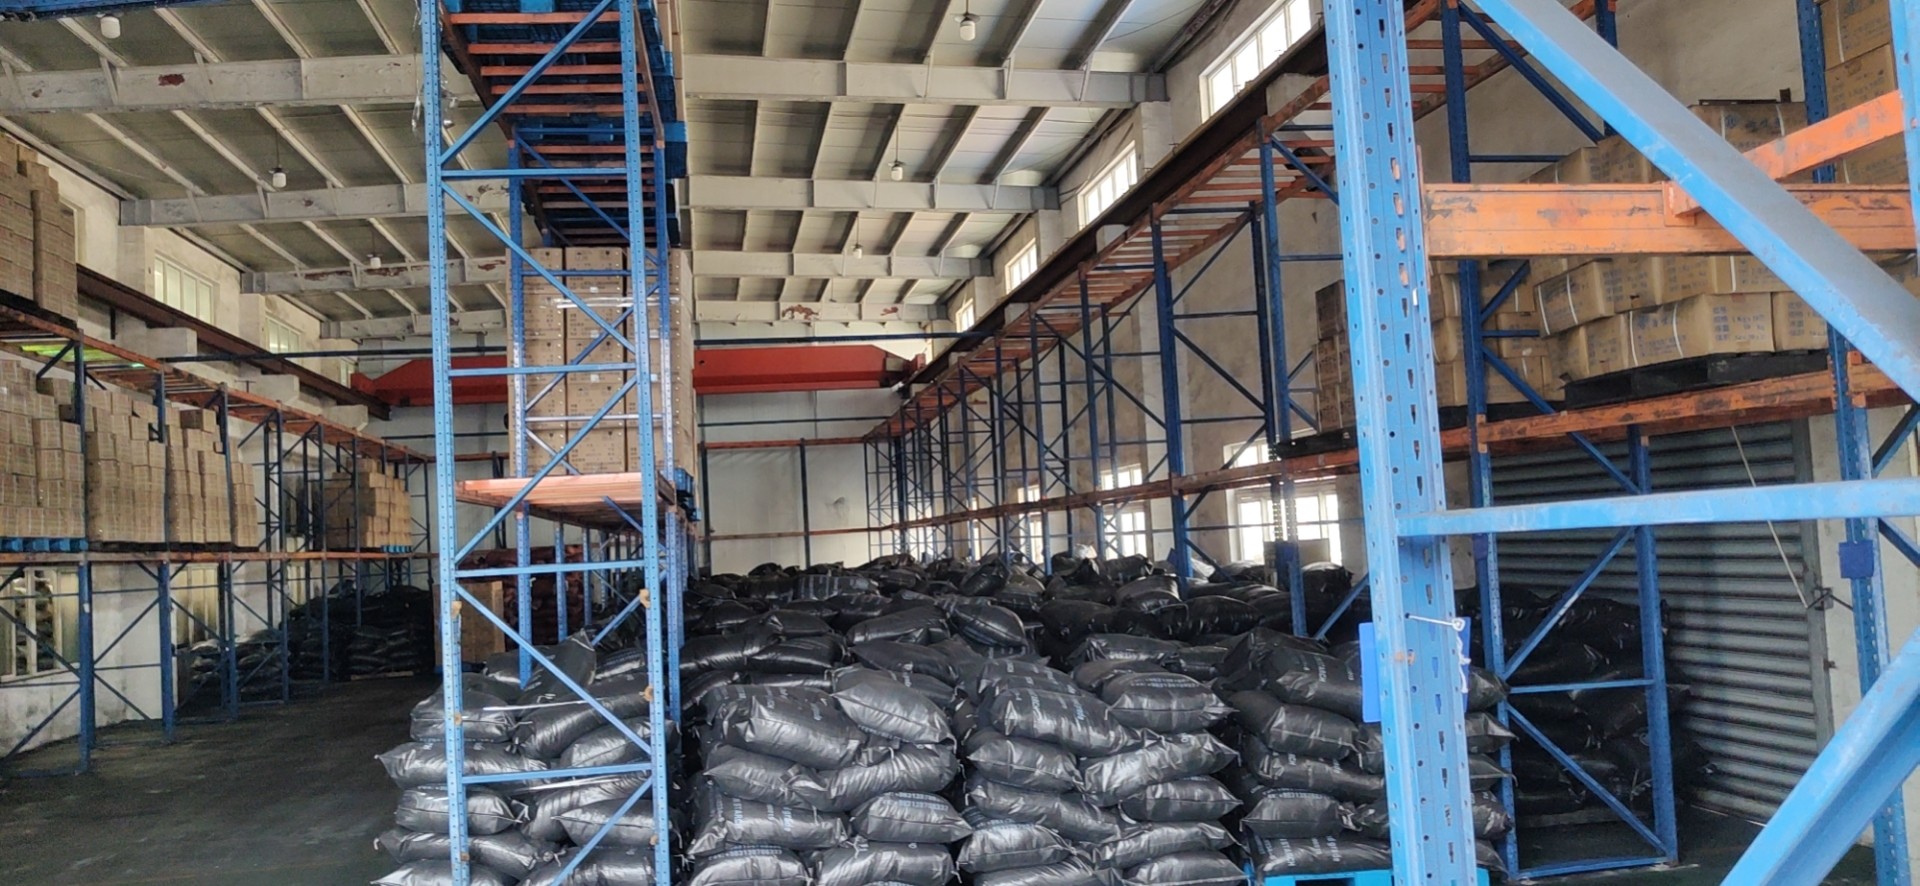 High Lodine Value Coal Granular Activated Carbon For Mercury Removal From China Manufacturer